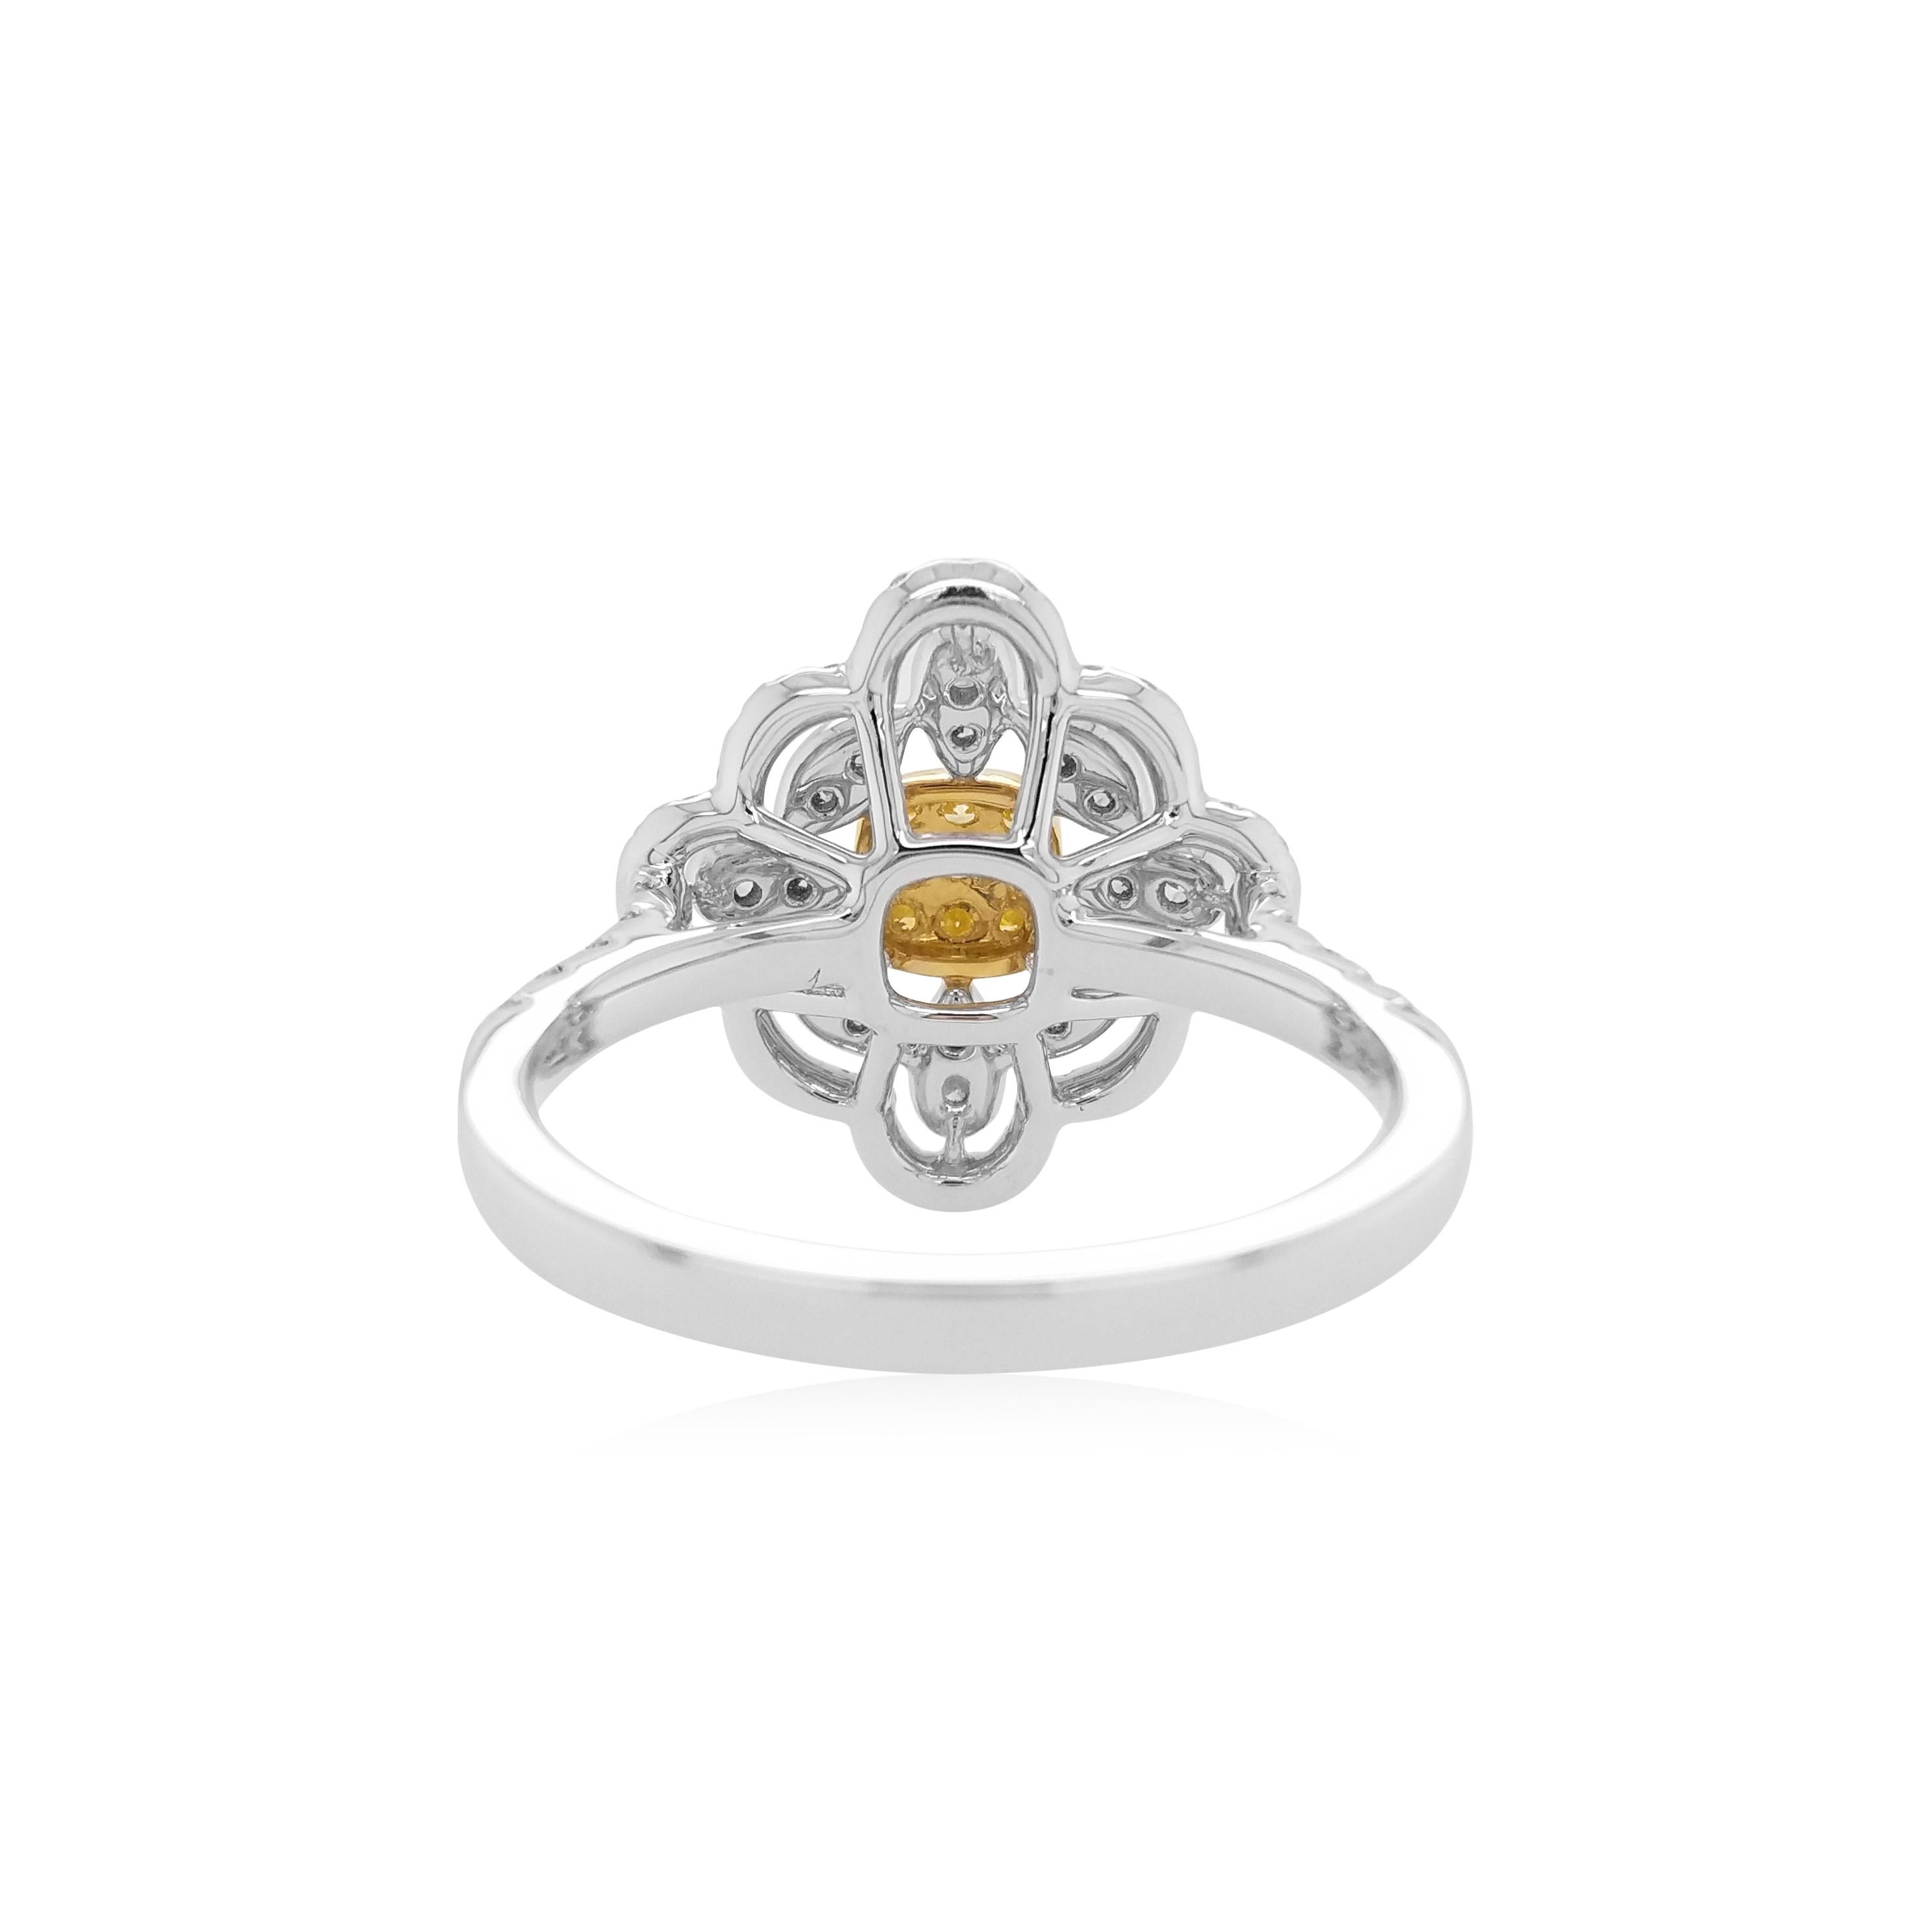 This exclusive cocktail ring features luscious natural Yellow diamonds at the heart of the design, by framing an ornate arrangement of delicate white diamonds set in platinum. Bold and striking, this unique ring is the perfect statement piece -